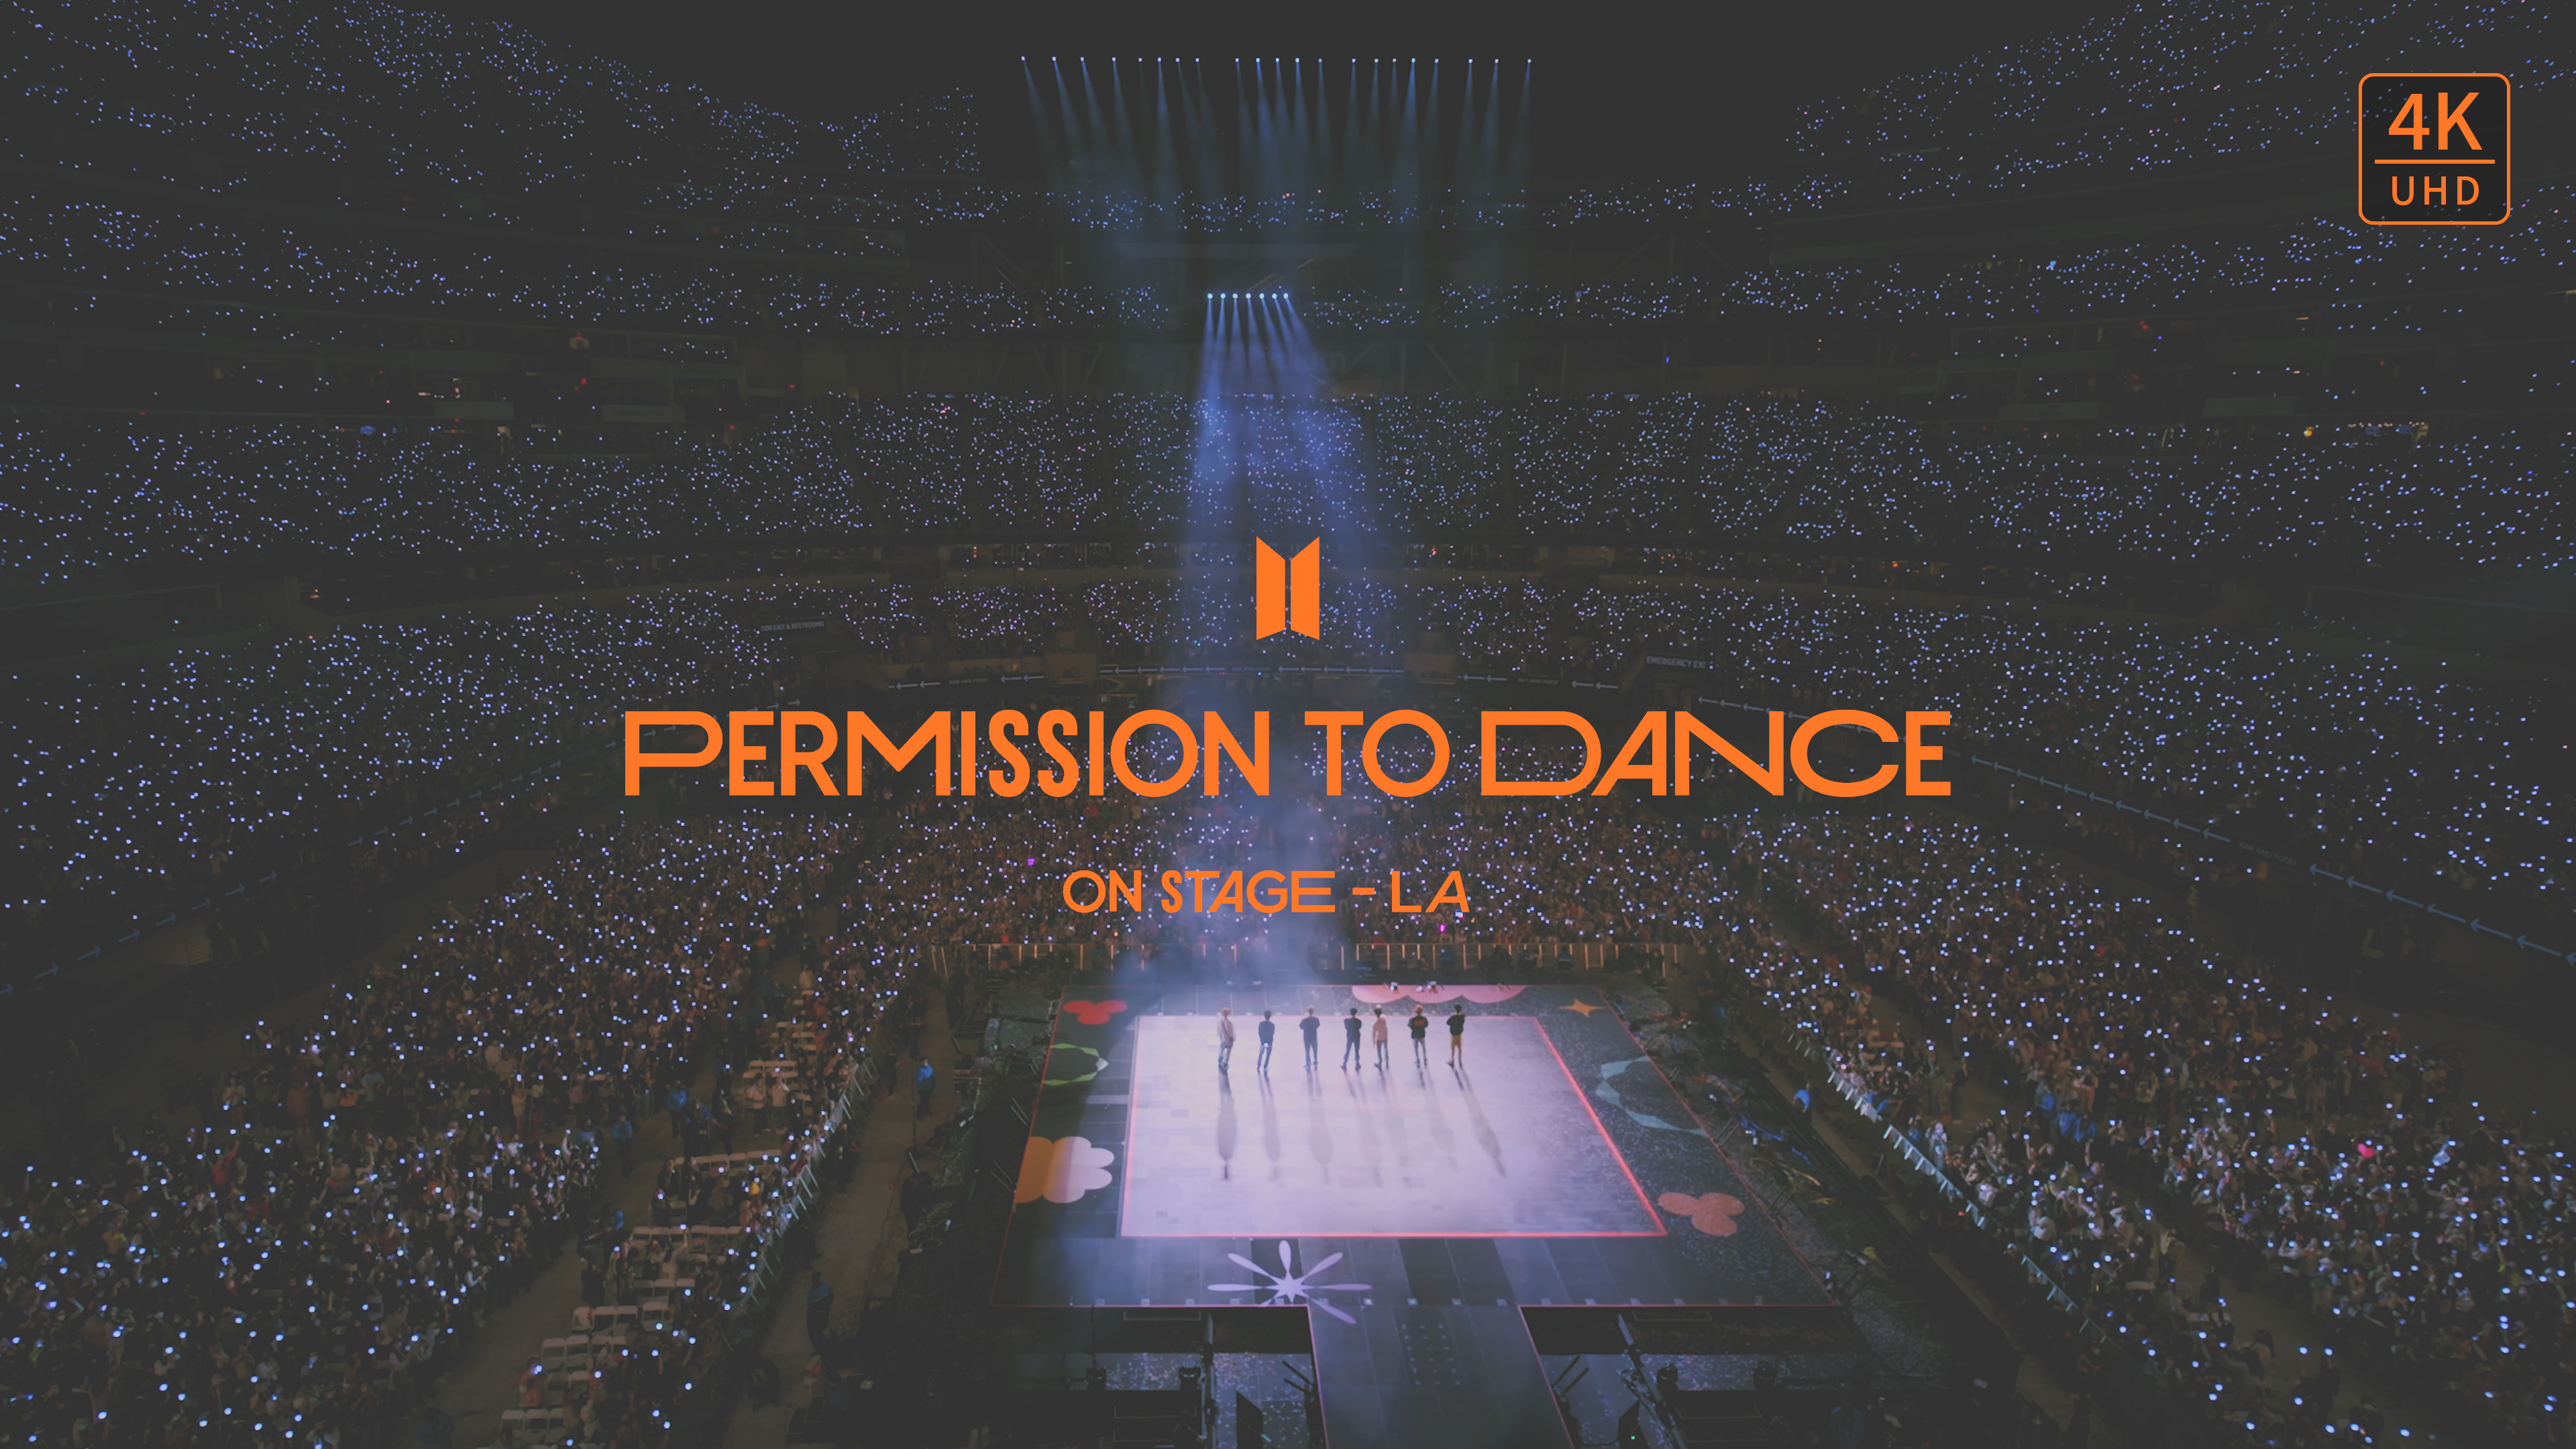 BTS PERMISSION TO DANCE ON STAGE in THE US SPOT #1